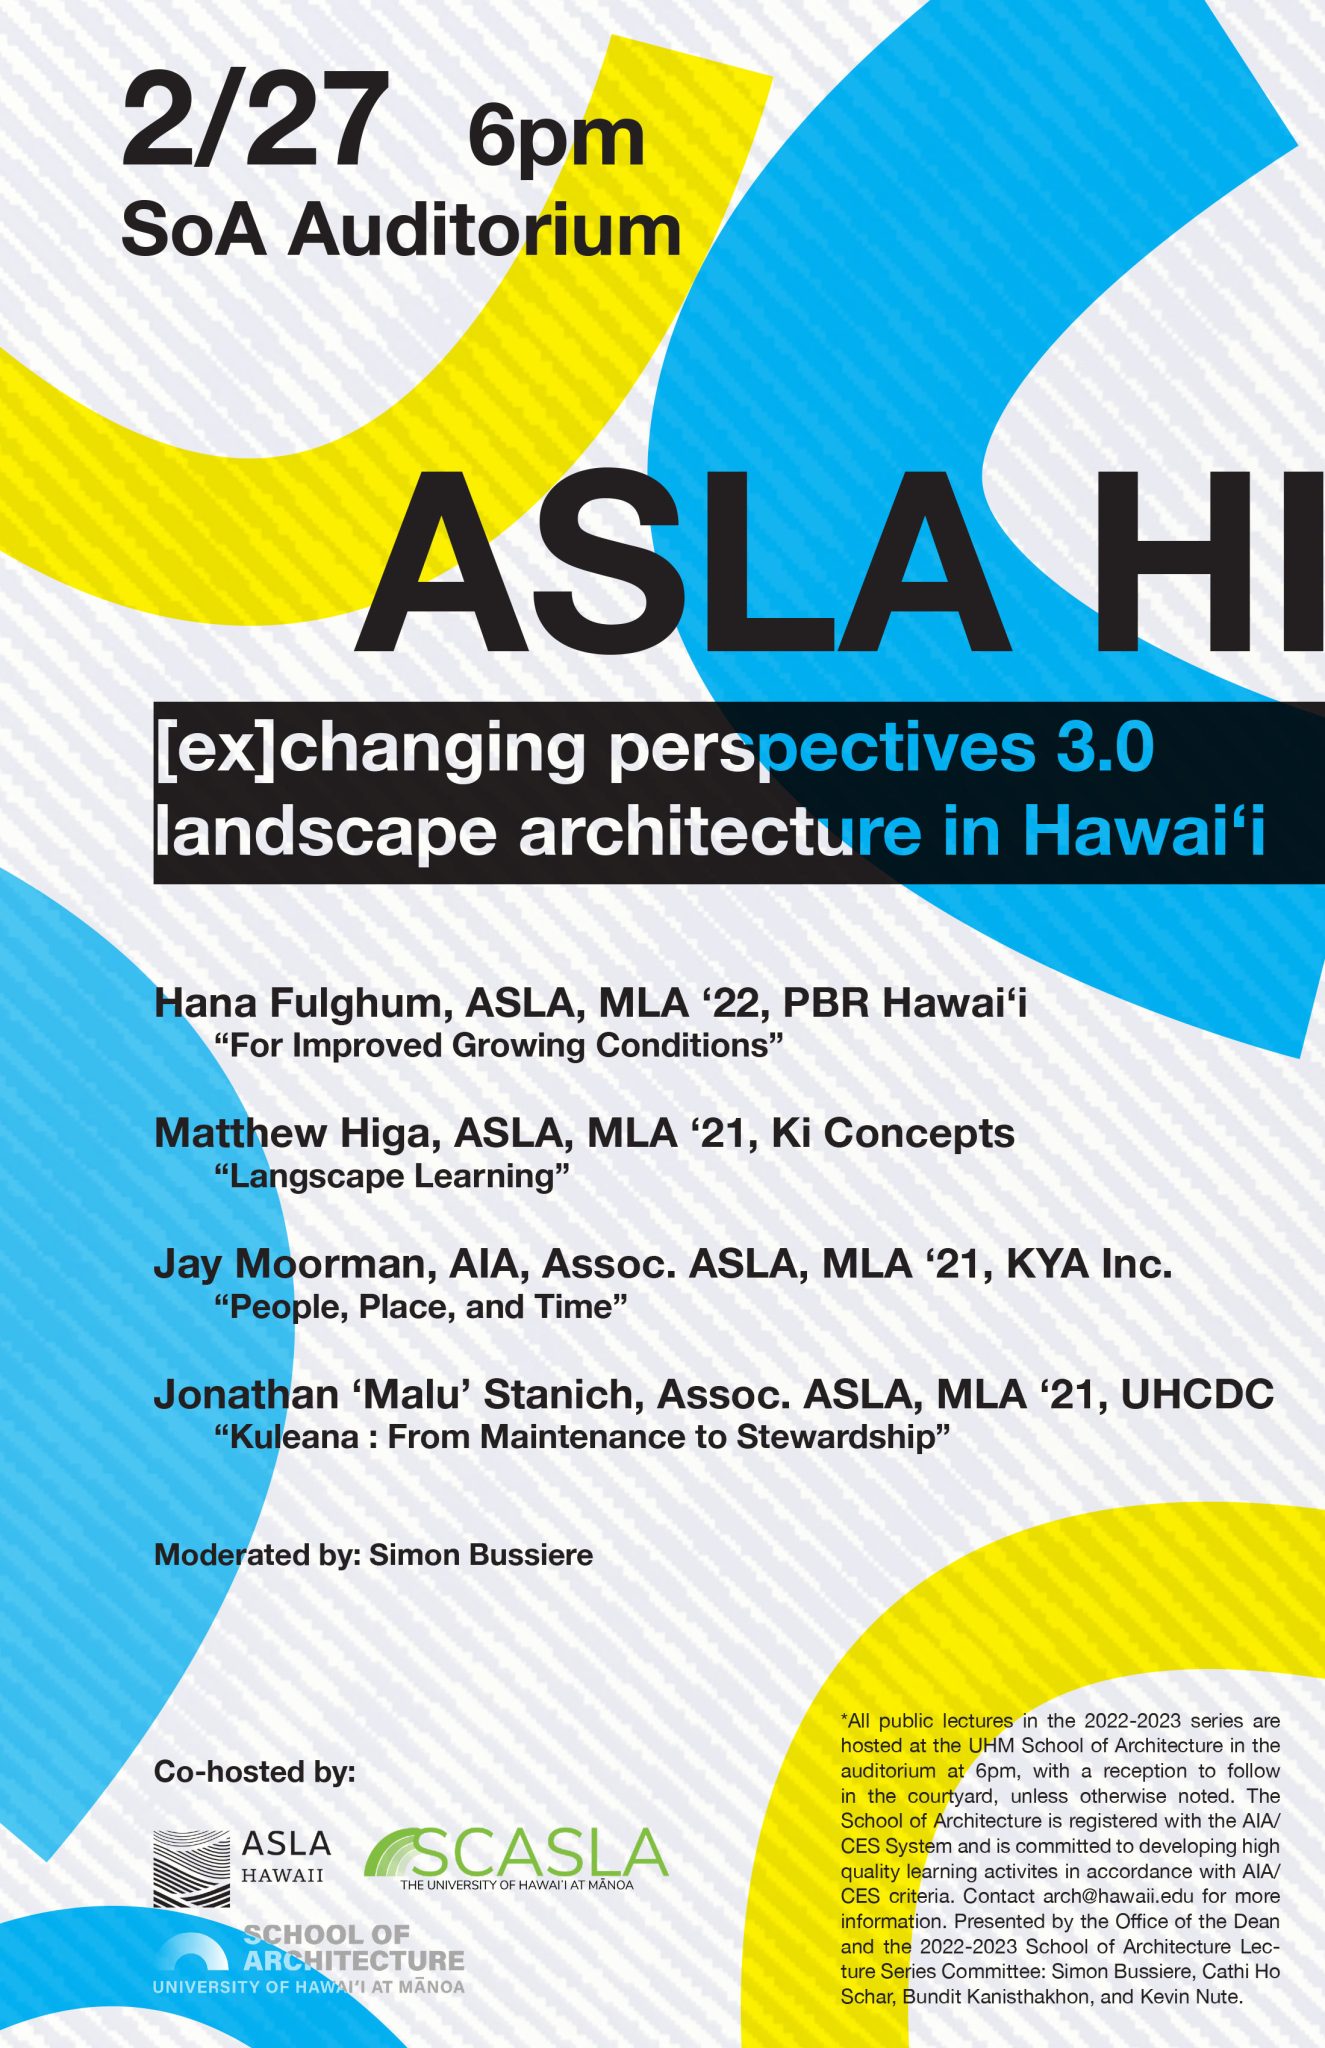 ASLA HI <br> [ex]changing perspectives 3.0 landscape architecture in Hawaiʻi <br><br>At UHM School of Architecture Auditorium <br>2/27 6pm